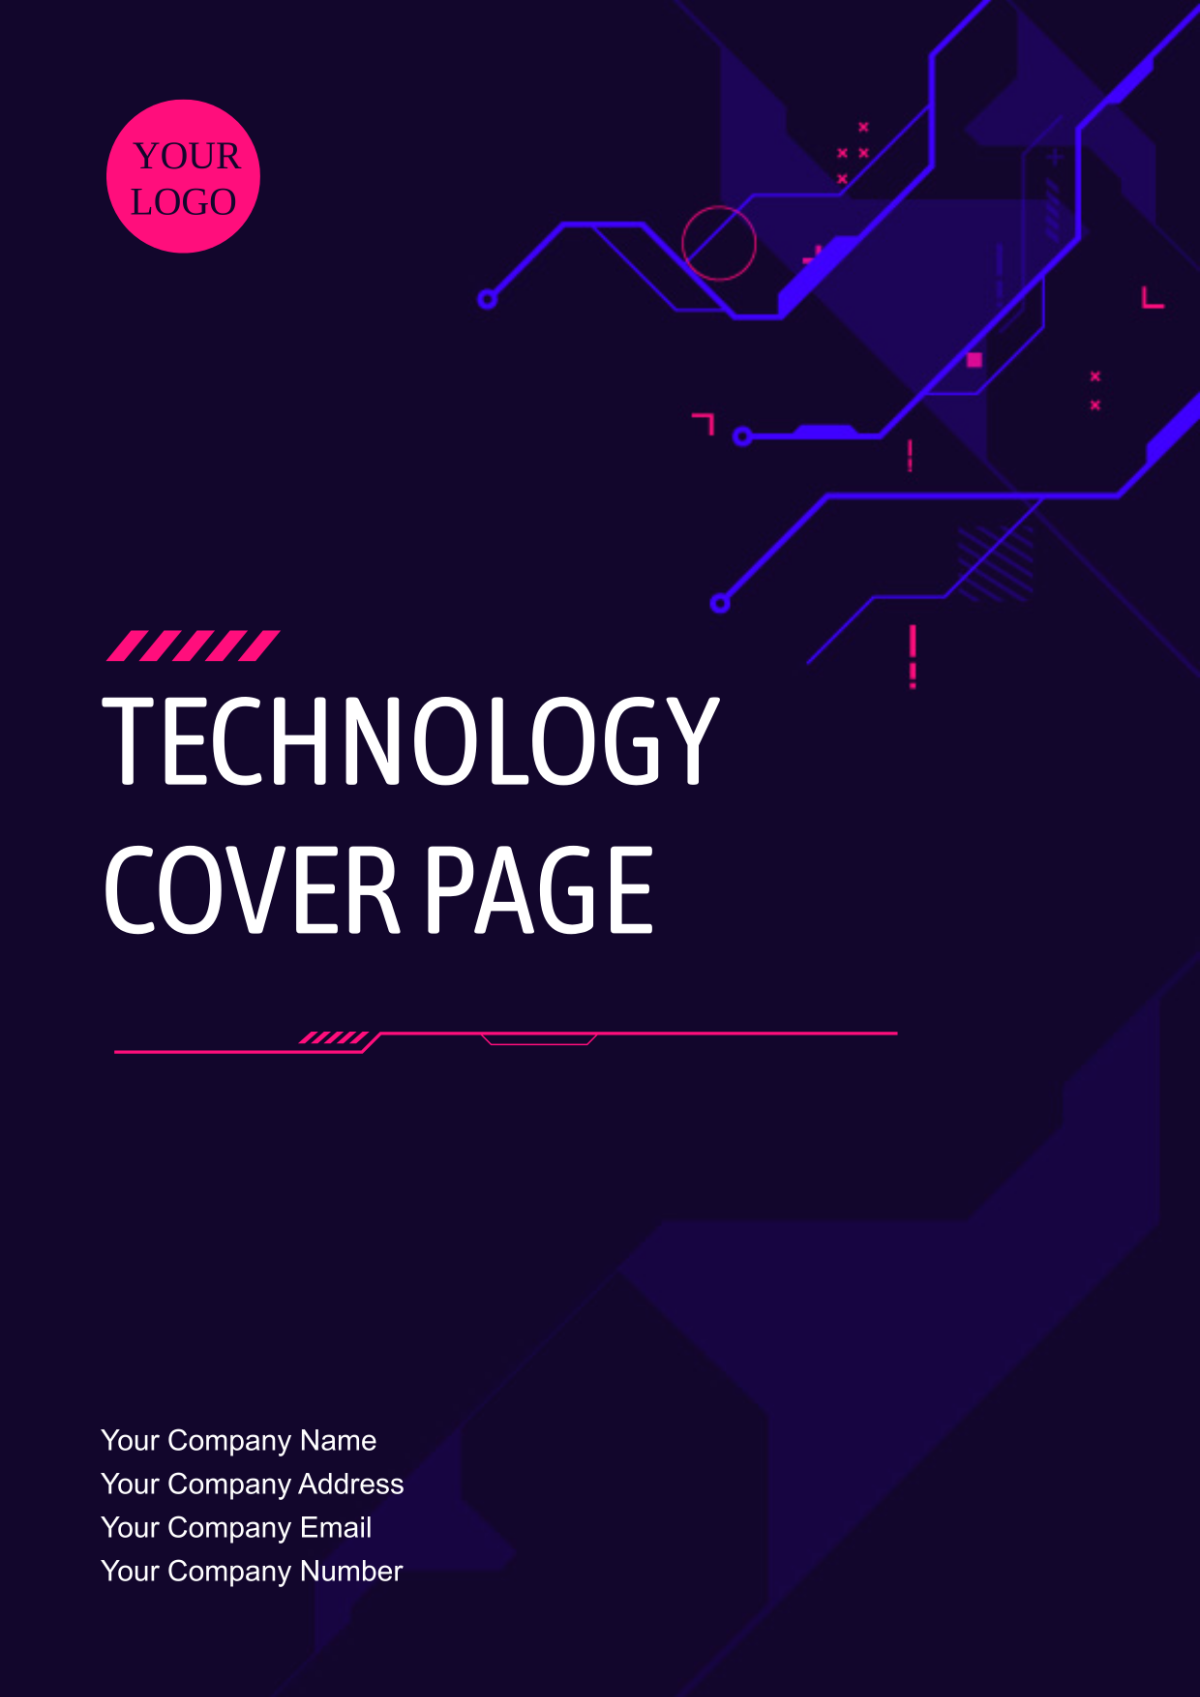 Technology Cover Page Image 